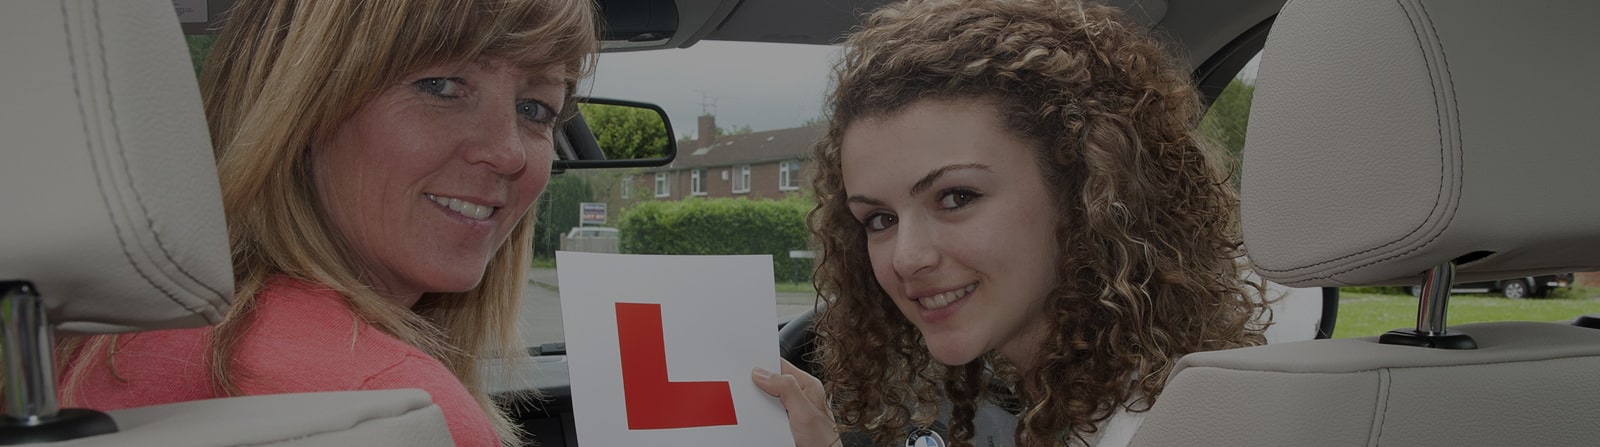 MTO Approved Driving School